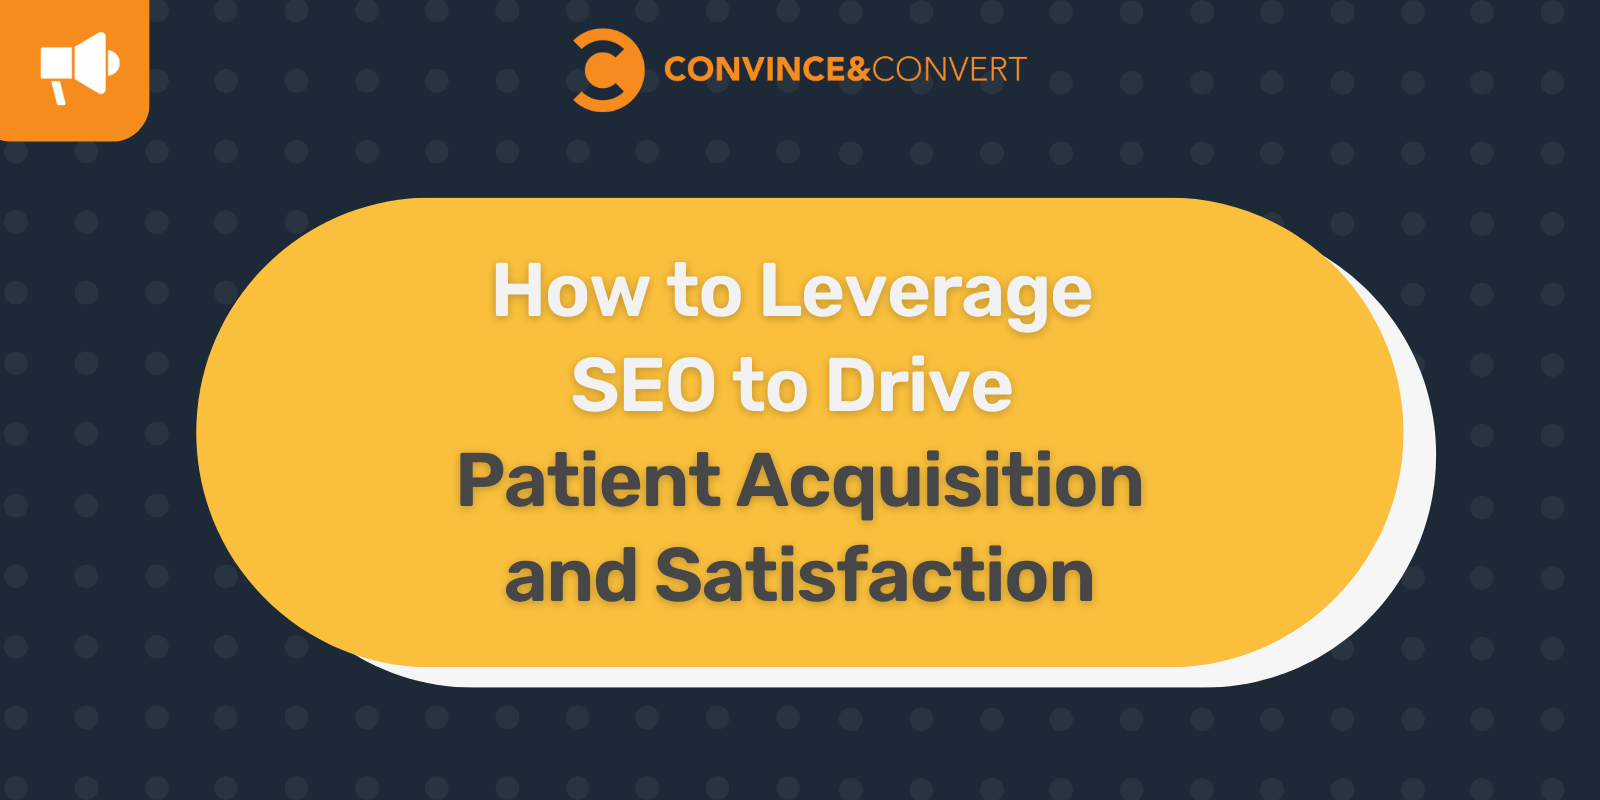 How to Leverage SEO to Drive Patient Acquisition and Satisfaction (1)